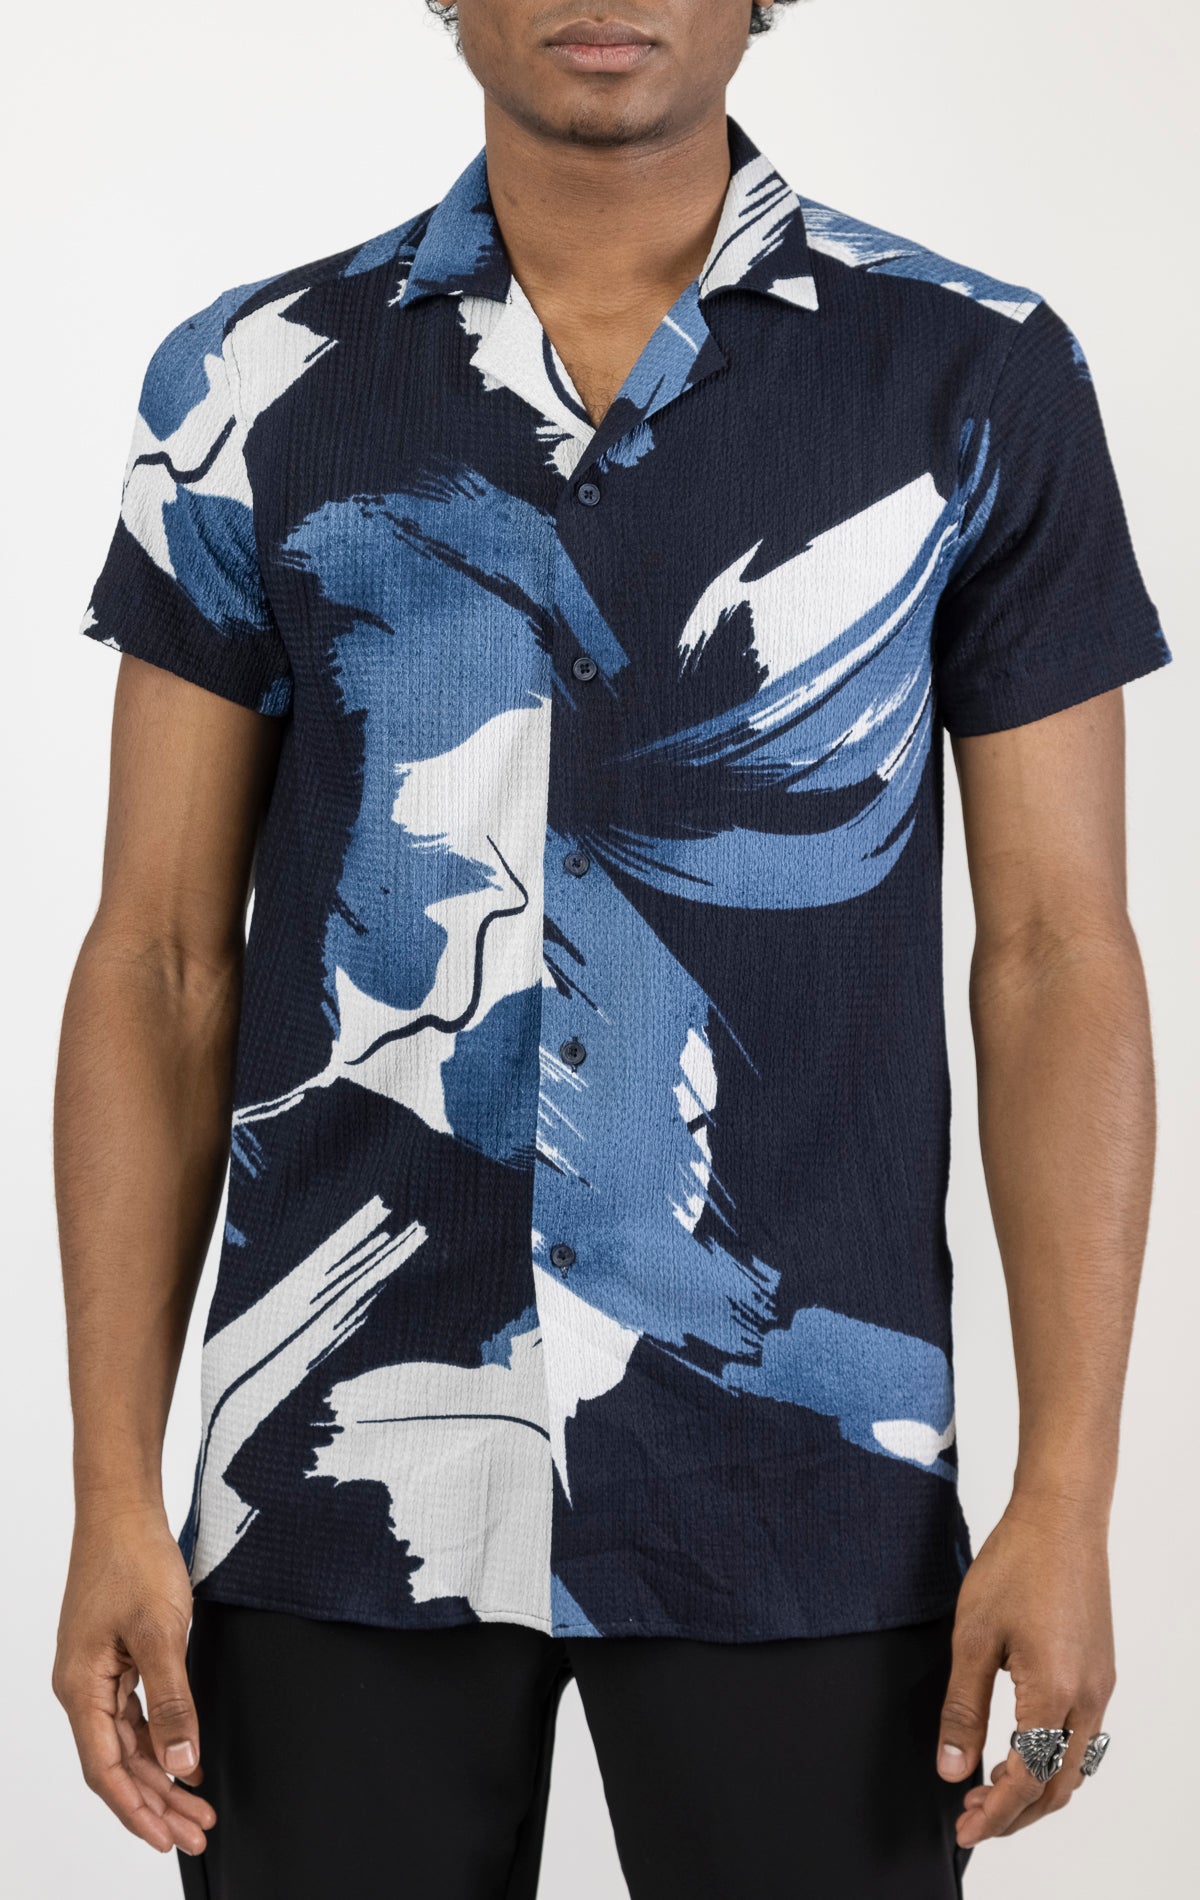 Men's short sleeve geometric pattern shirt in blue. The shirt is made from a lightweight and breathable fabric (99% polyester, 1% elastane) and features a relaxed fit, short sleeves, a classic collar, and a button-up front closure.